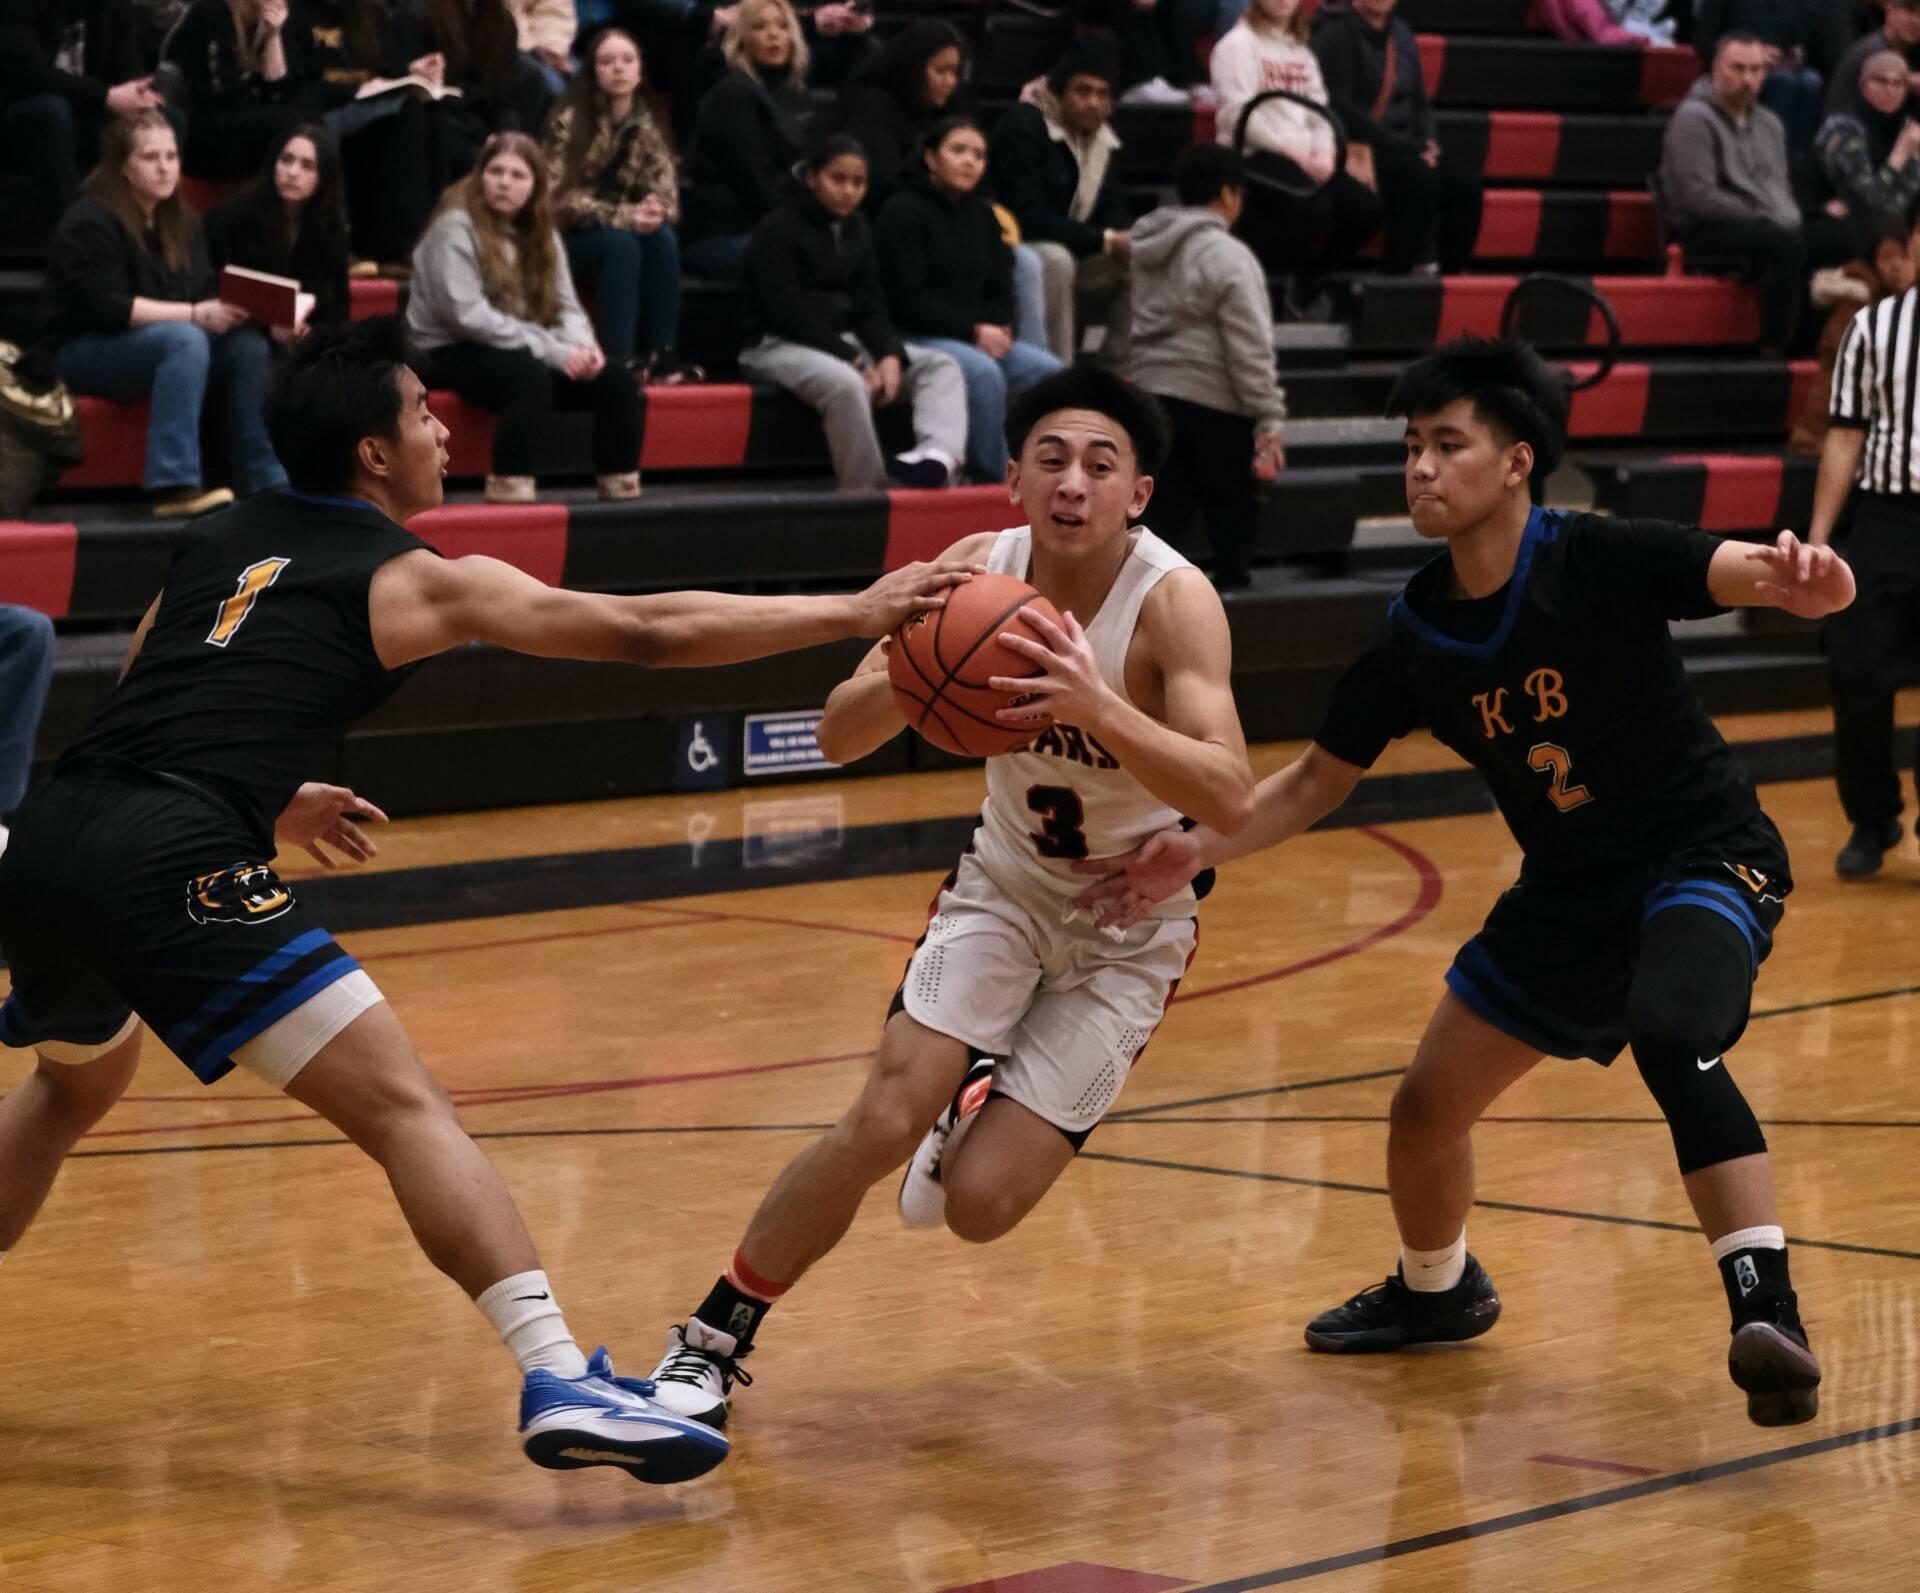 Juneau-Douglas High School: Yadaa.at Kalé senior Alwen Carrillo (3) is defended by Kodiak senior Aron Paguio (1) and junior Bubba Basuel (2) during the Crimson Bears 75-50 win over the Bears on Saturday at the George Houston Gymnasium. (Klas Stolpe/For the Juneau Empire)